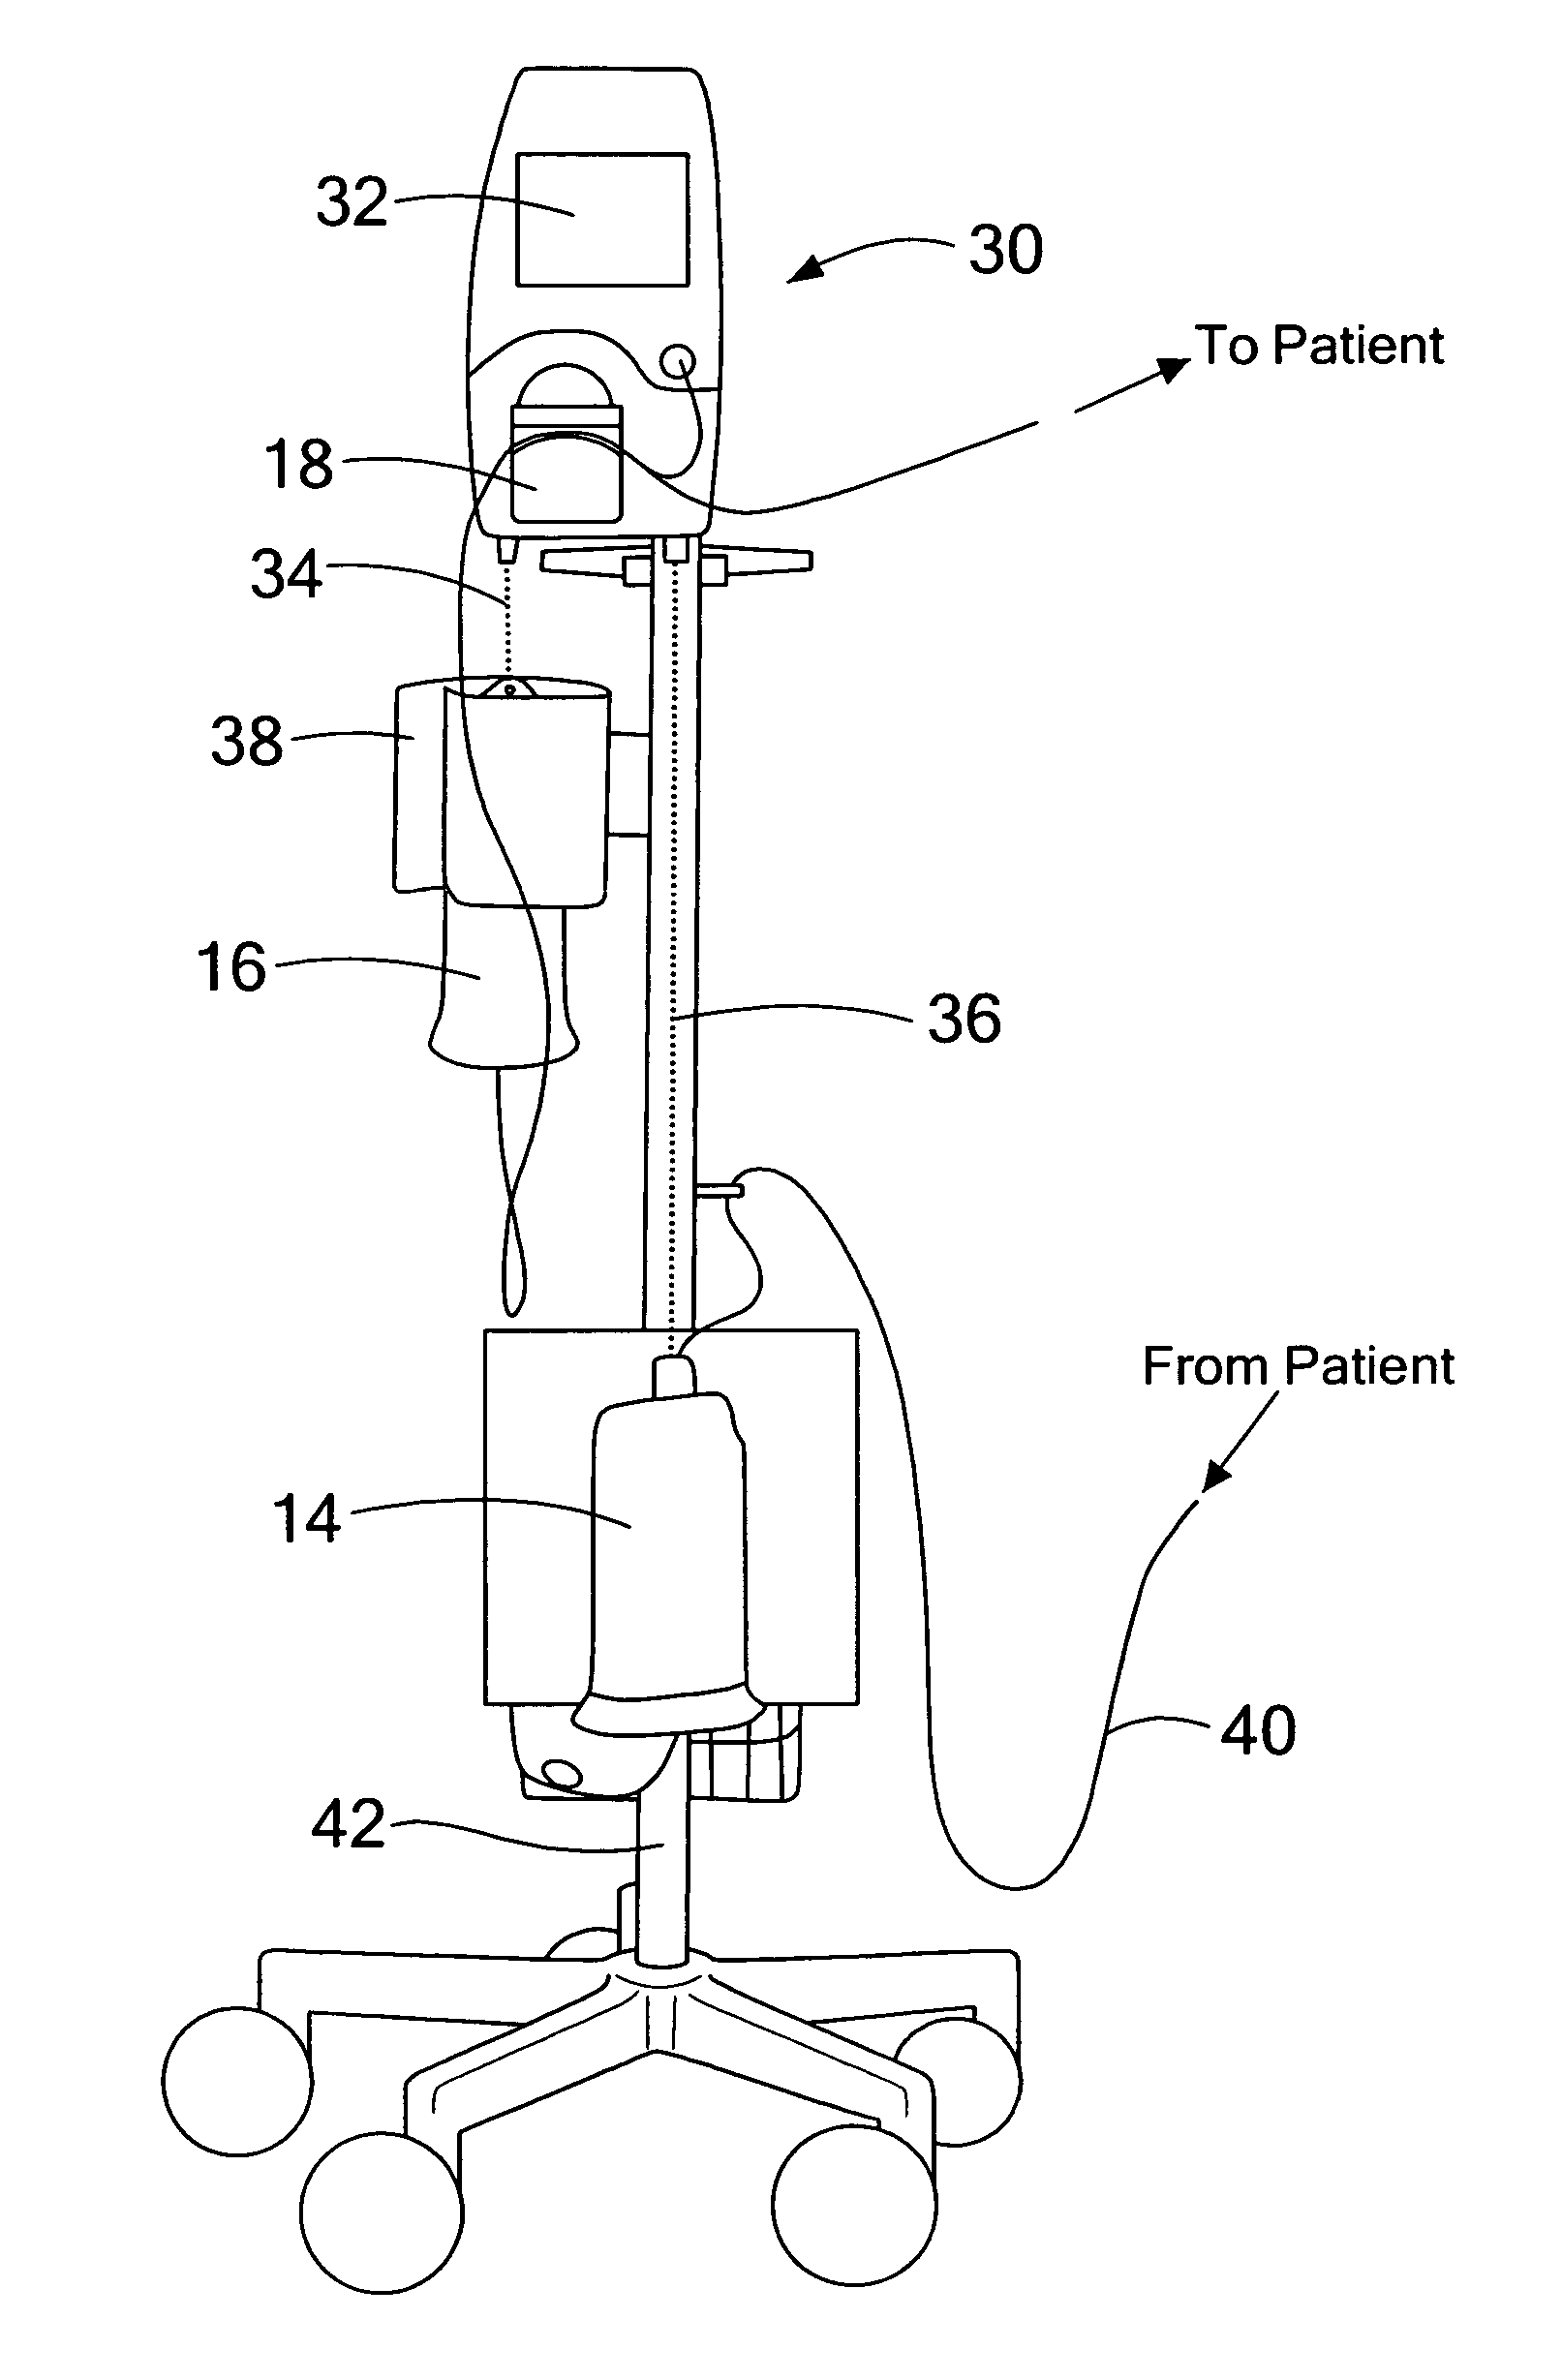 Fluid replacement device